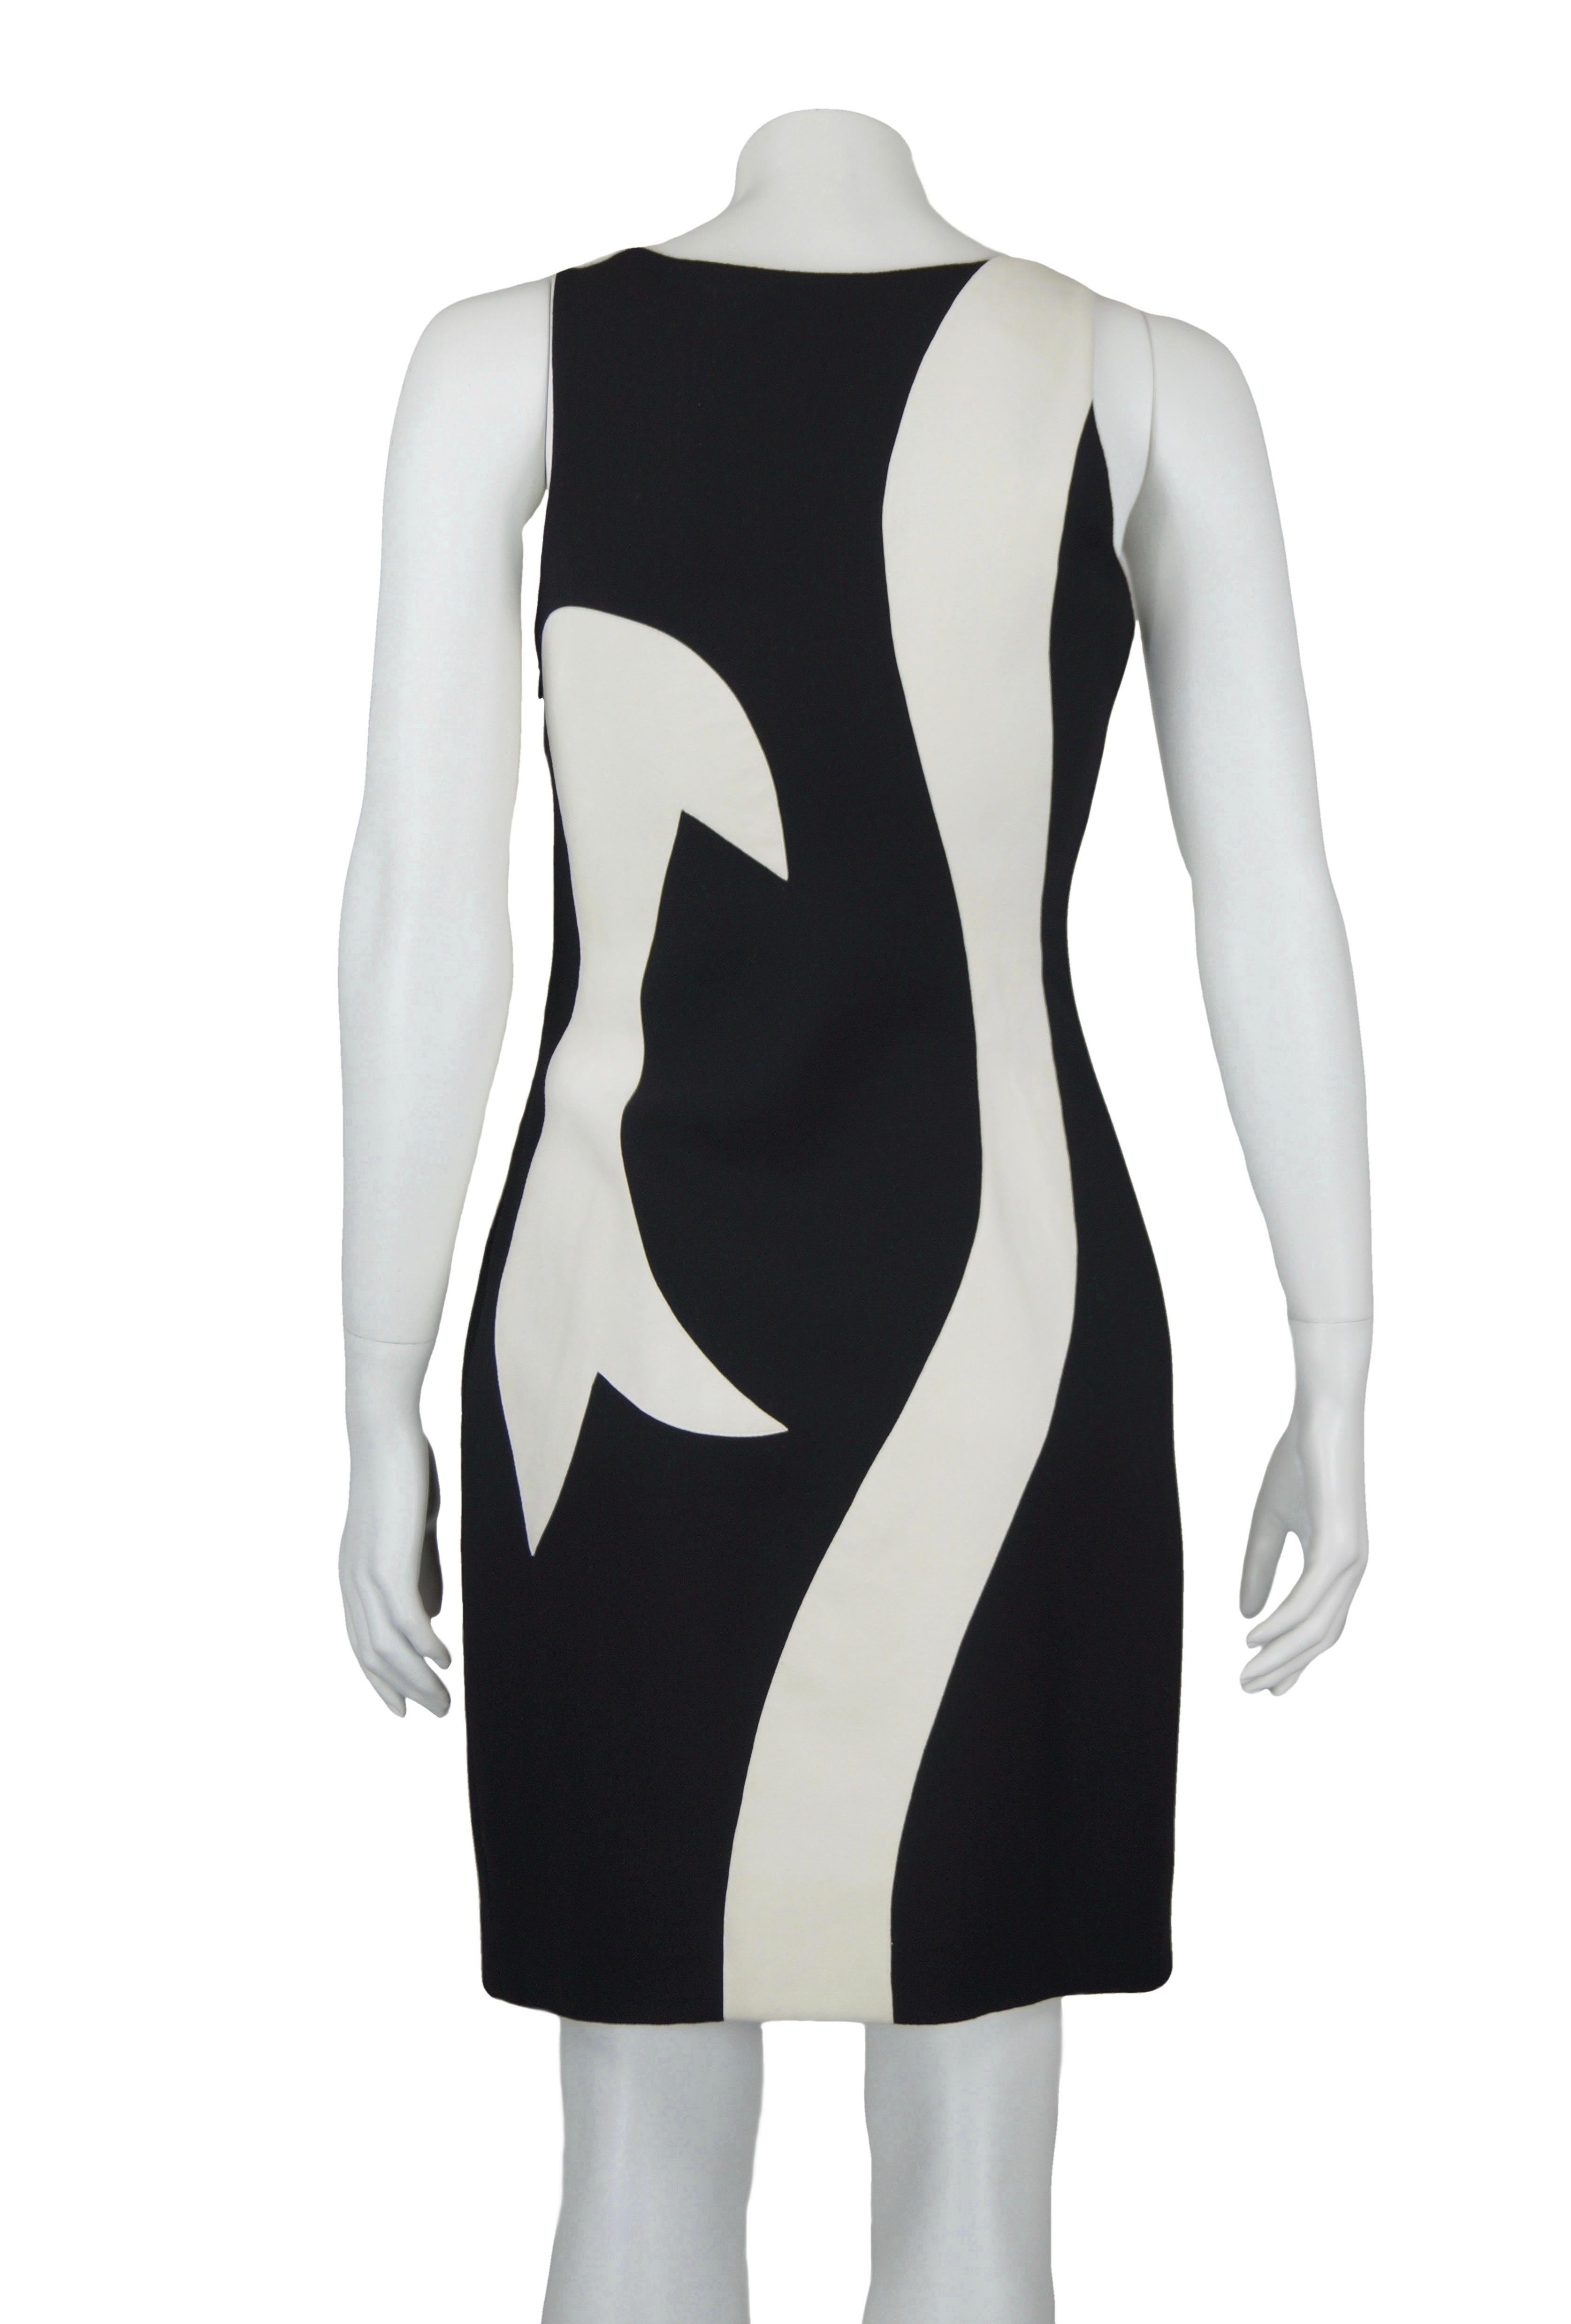 VERSACE coat and dress black and white F/W 2011 For Sale 7